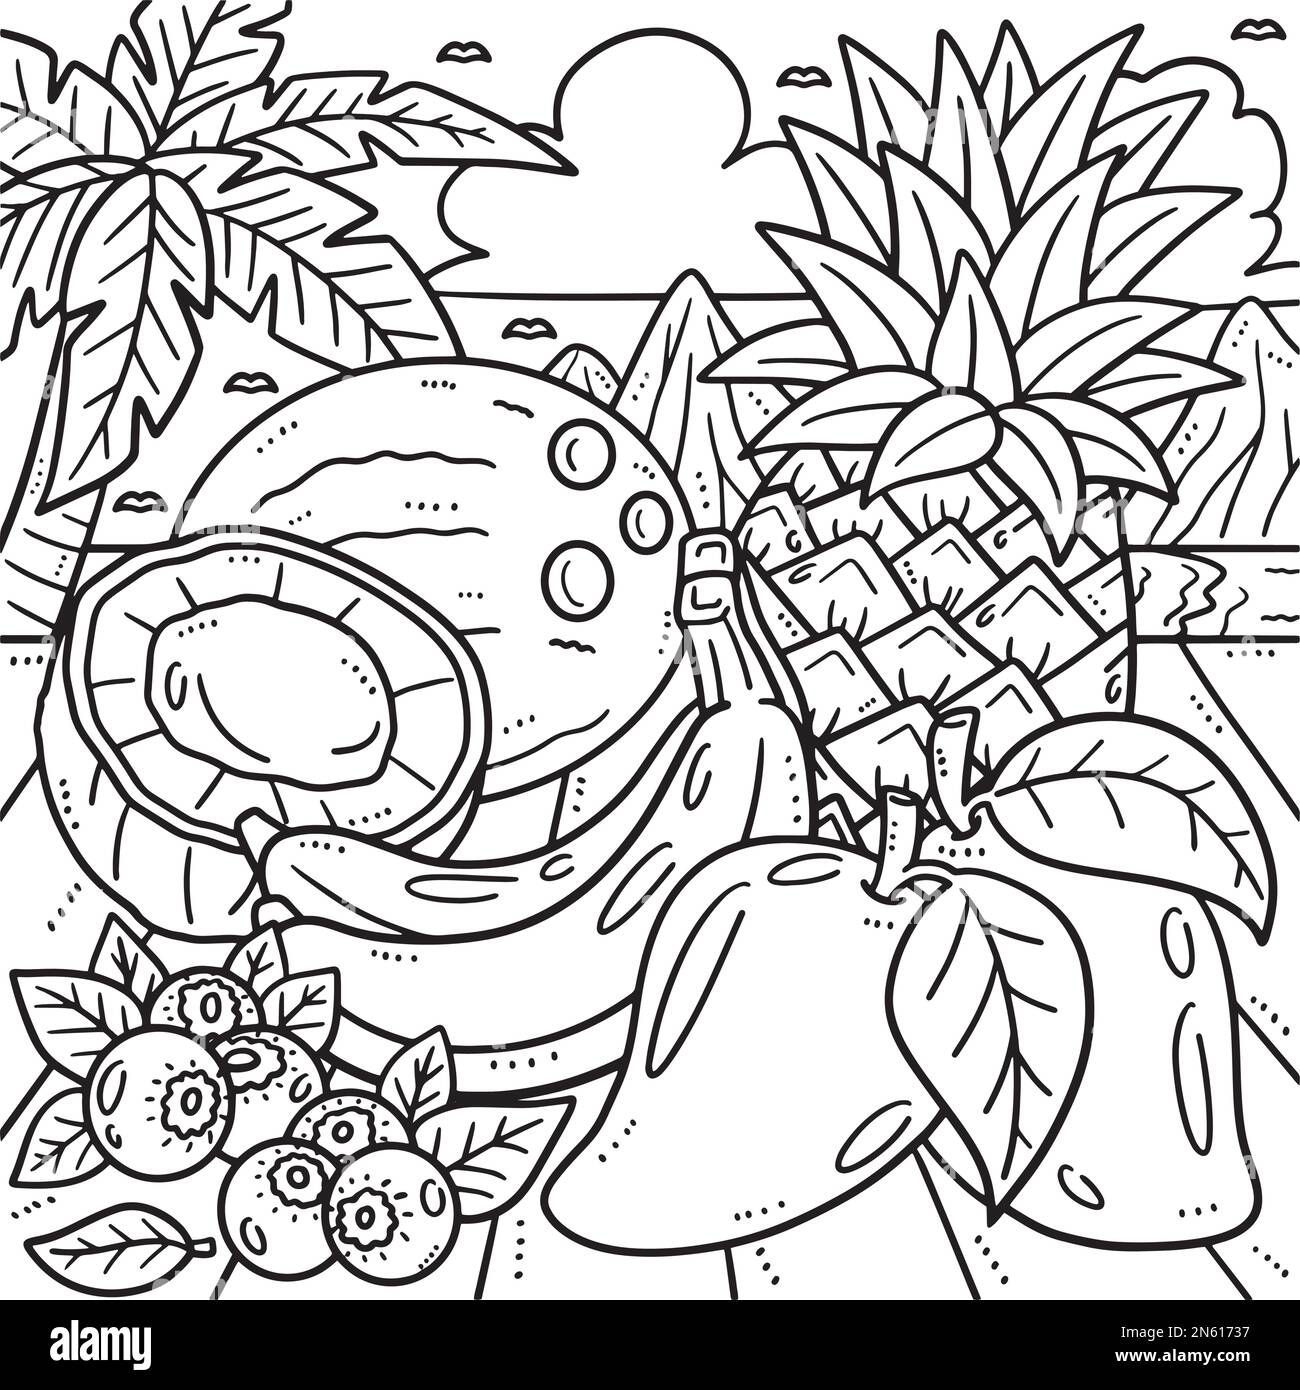 Summer tropical fruits coloring page for kids stock vector image art